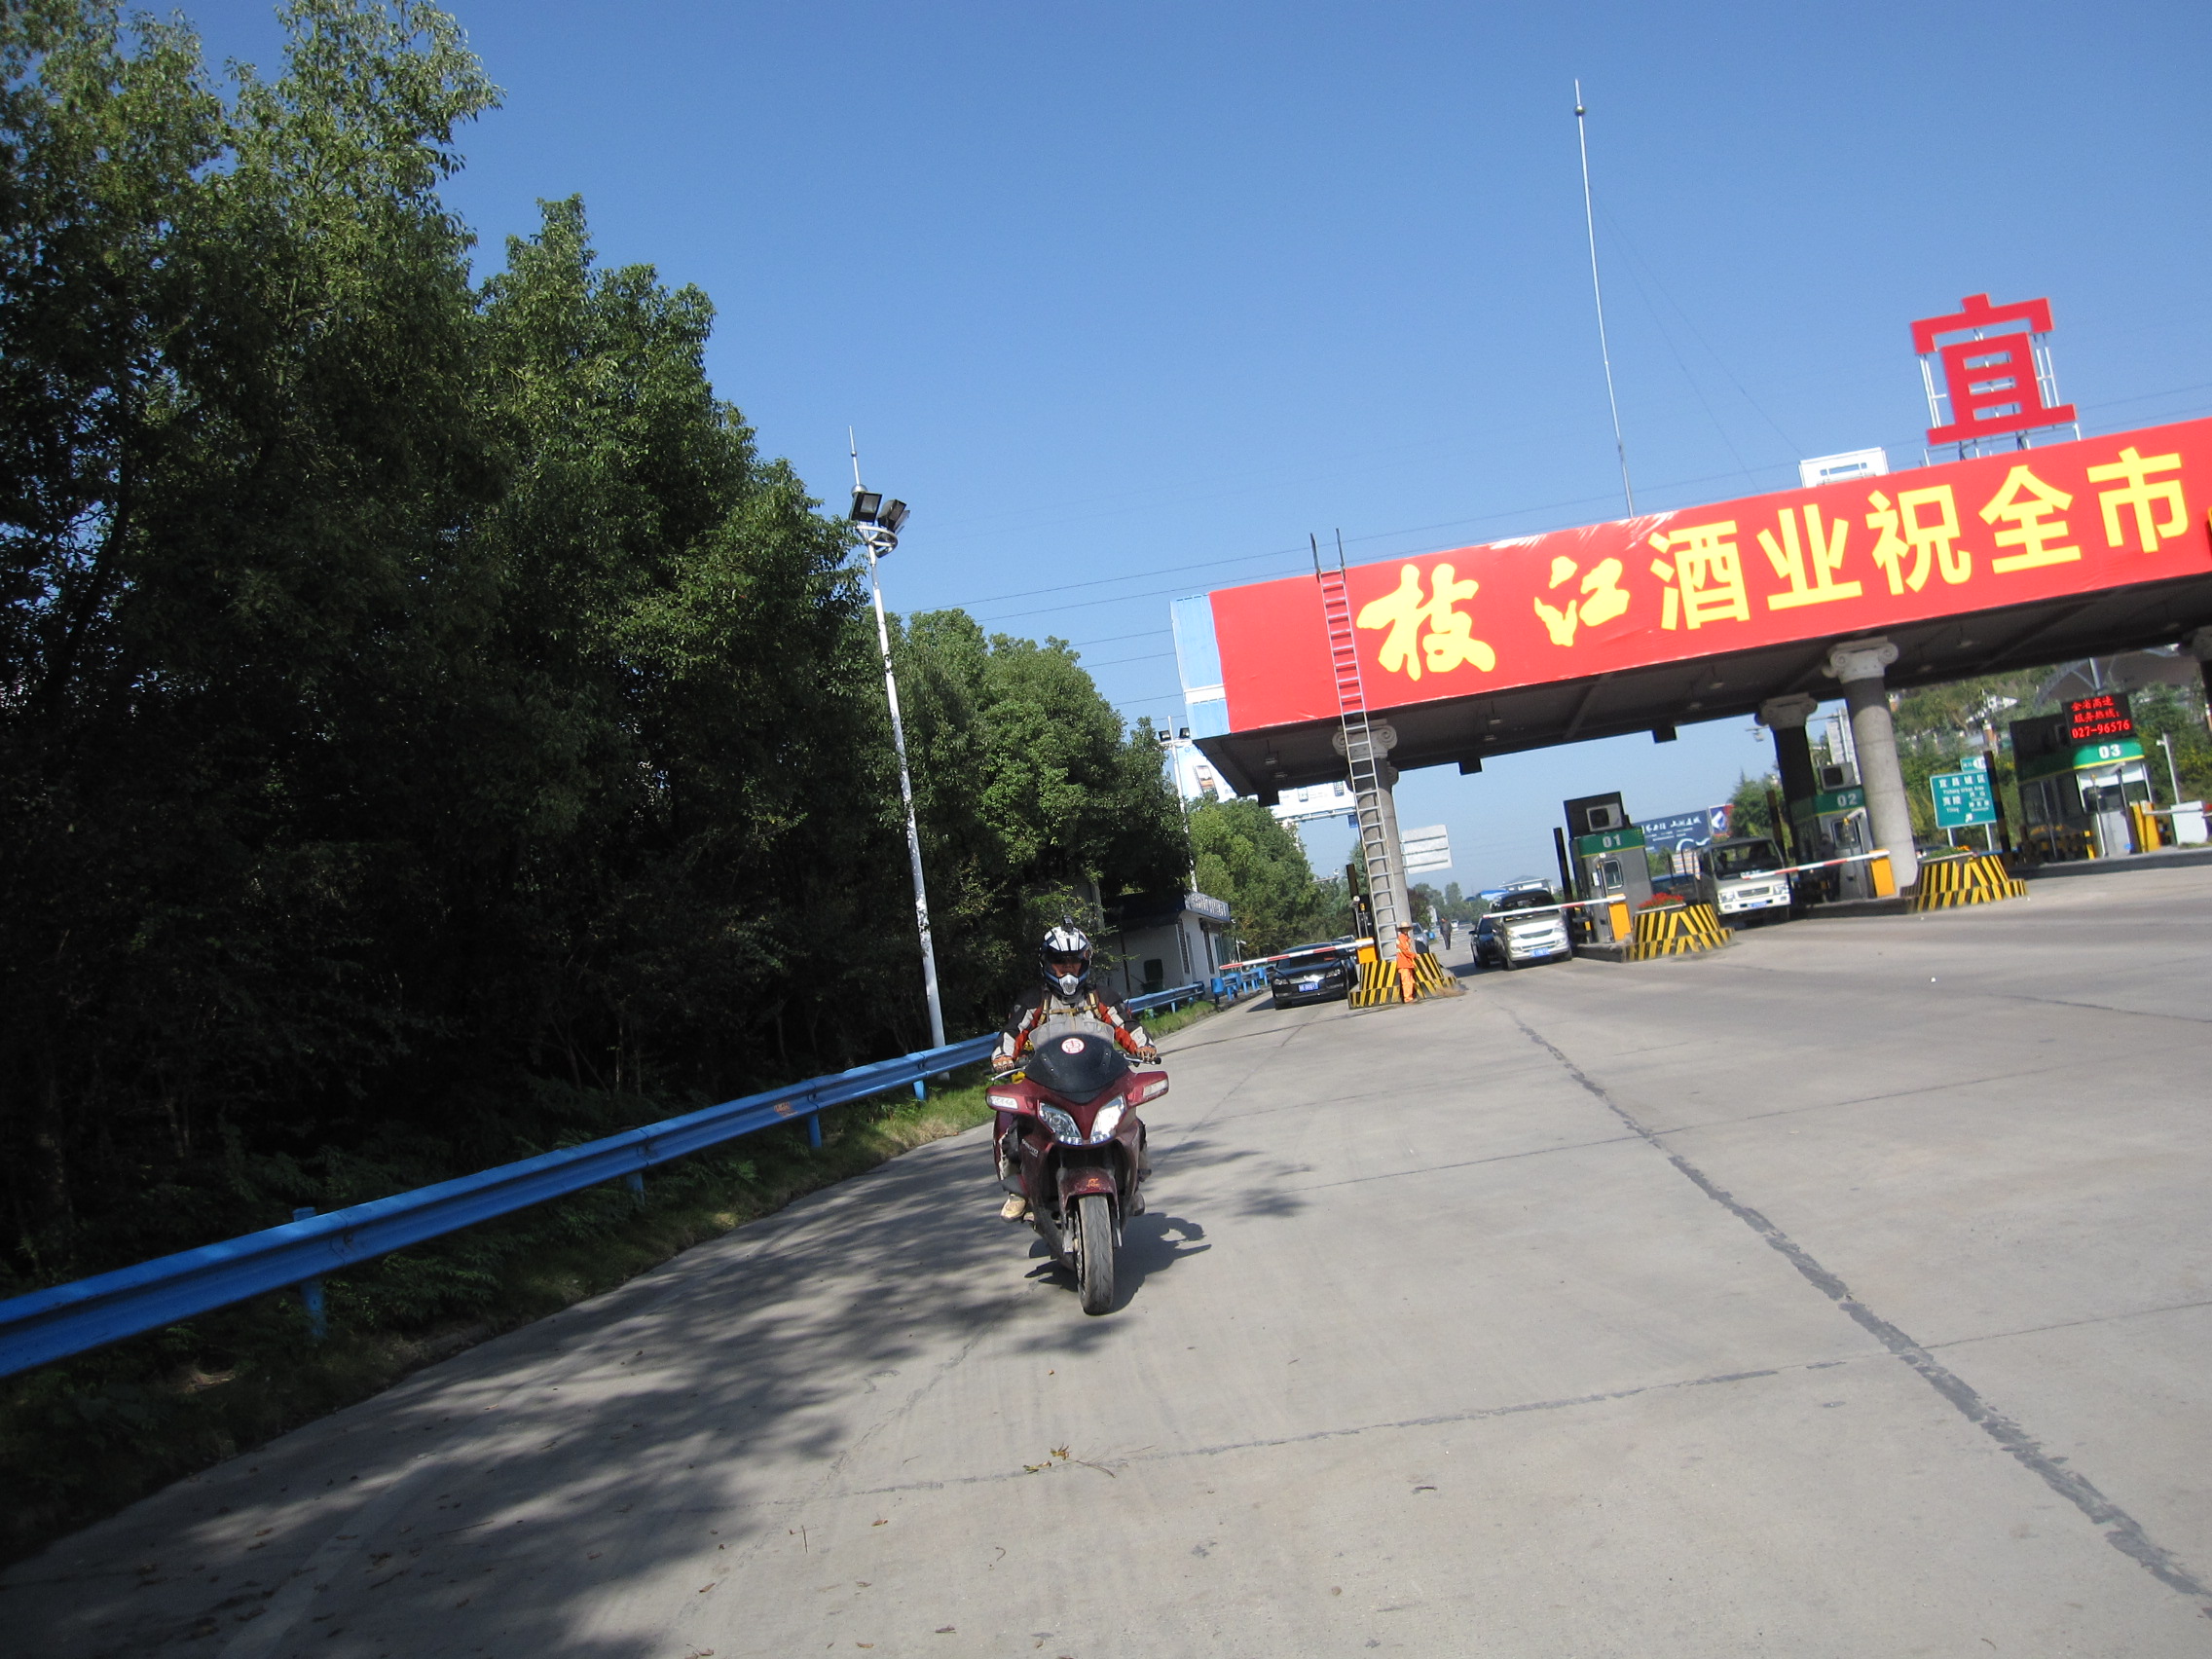 No problems getting through toll onto the highway in Hubei on a beautiful sunny day